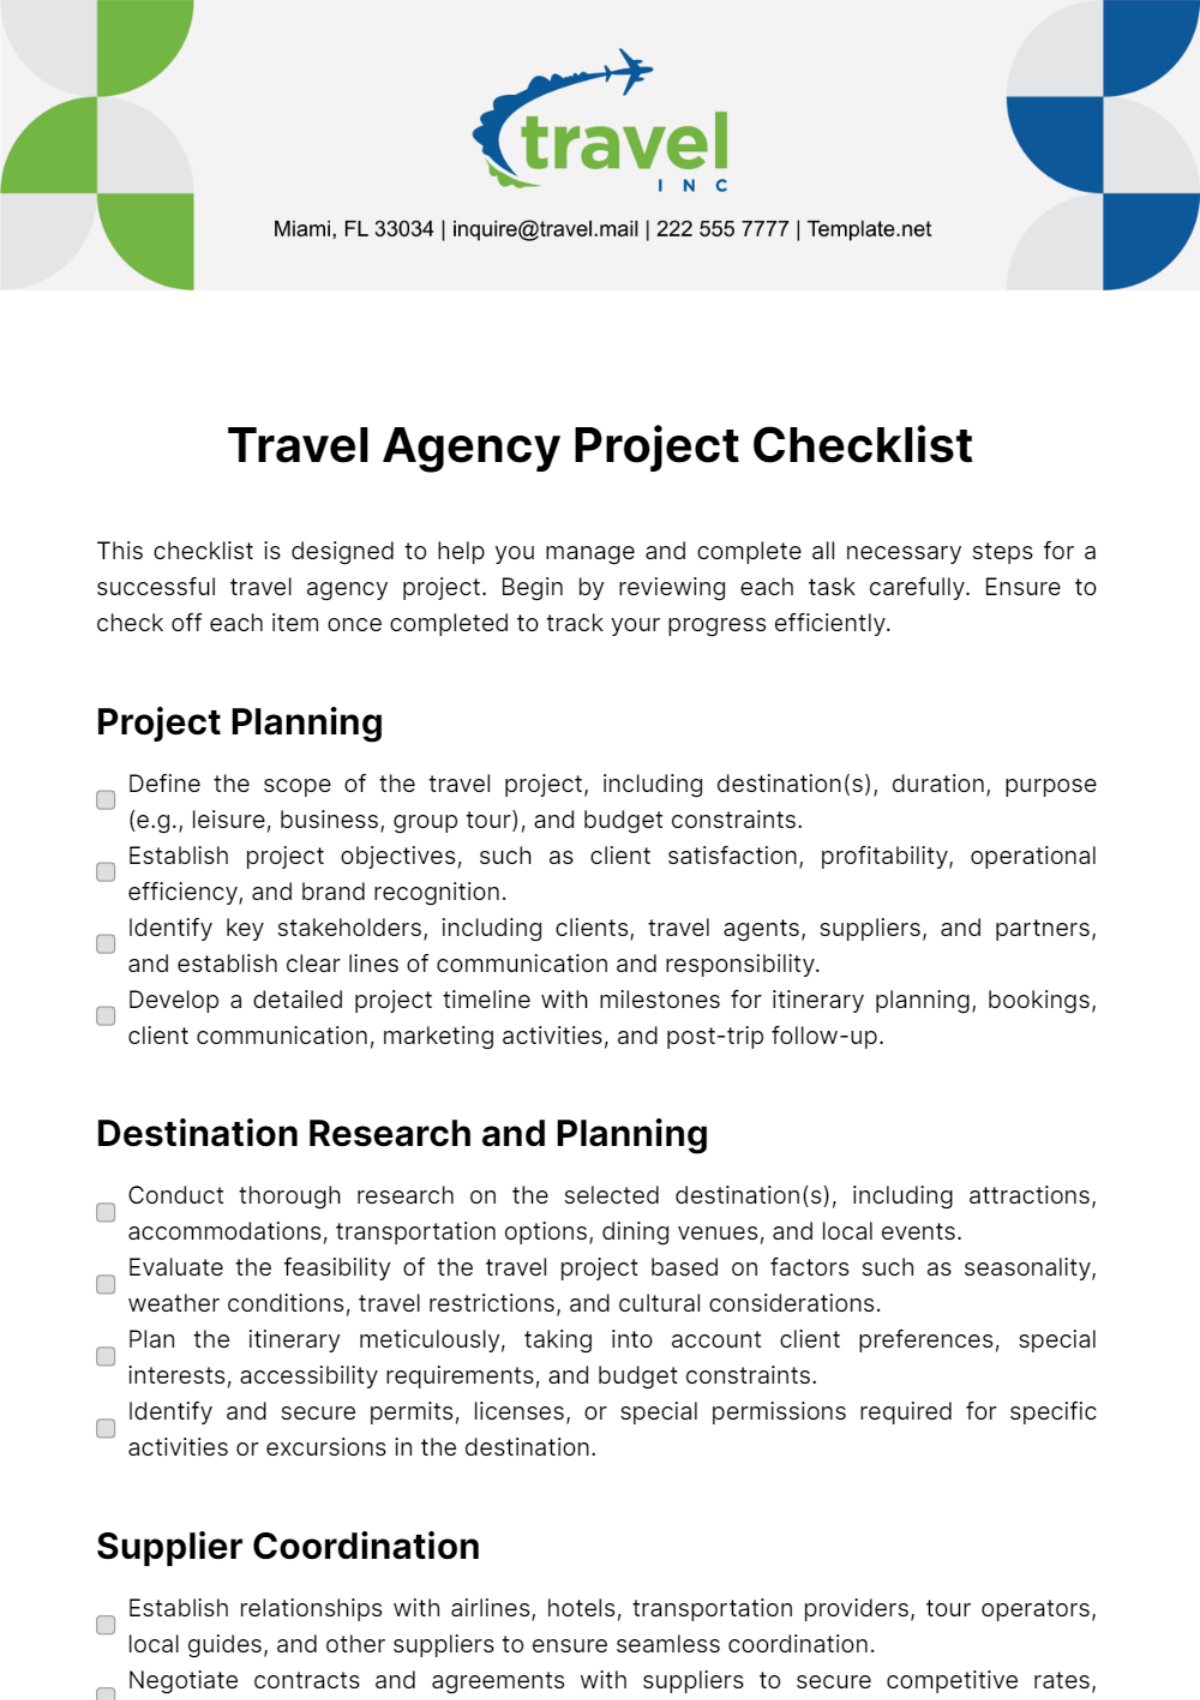 Free Travel Agency Project Checklist Template